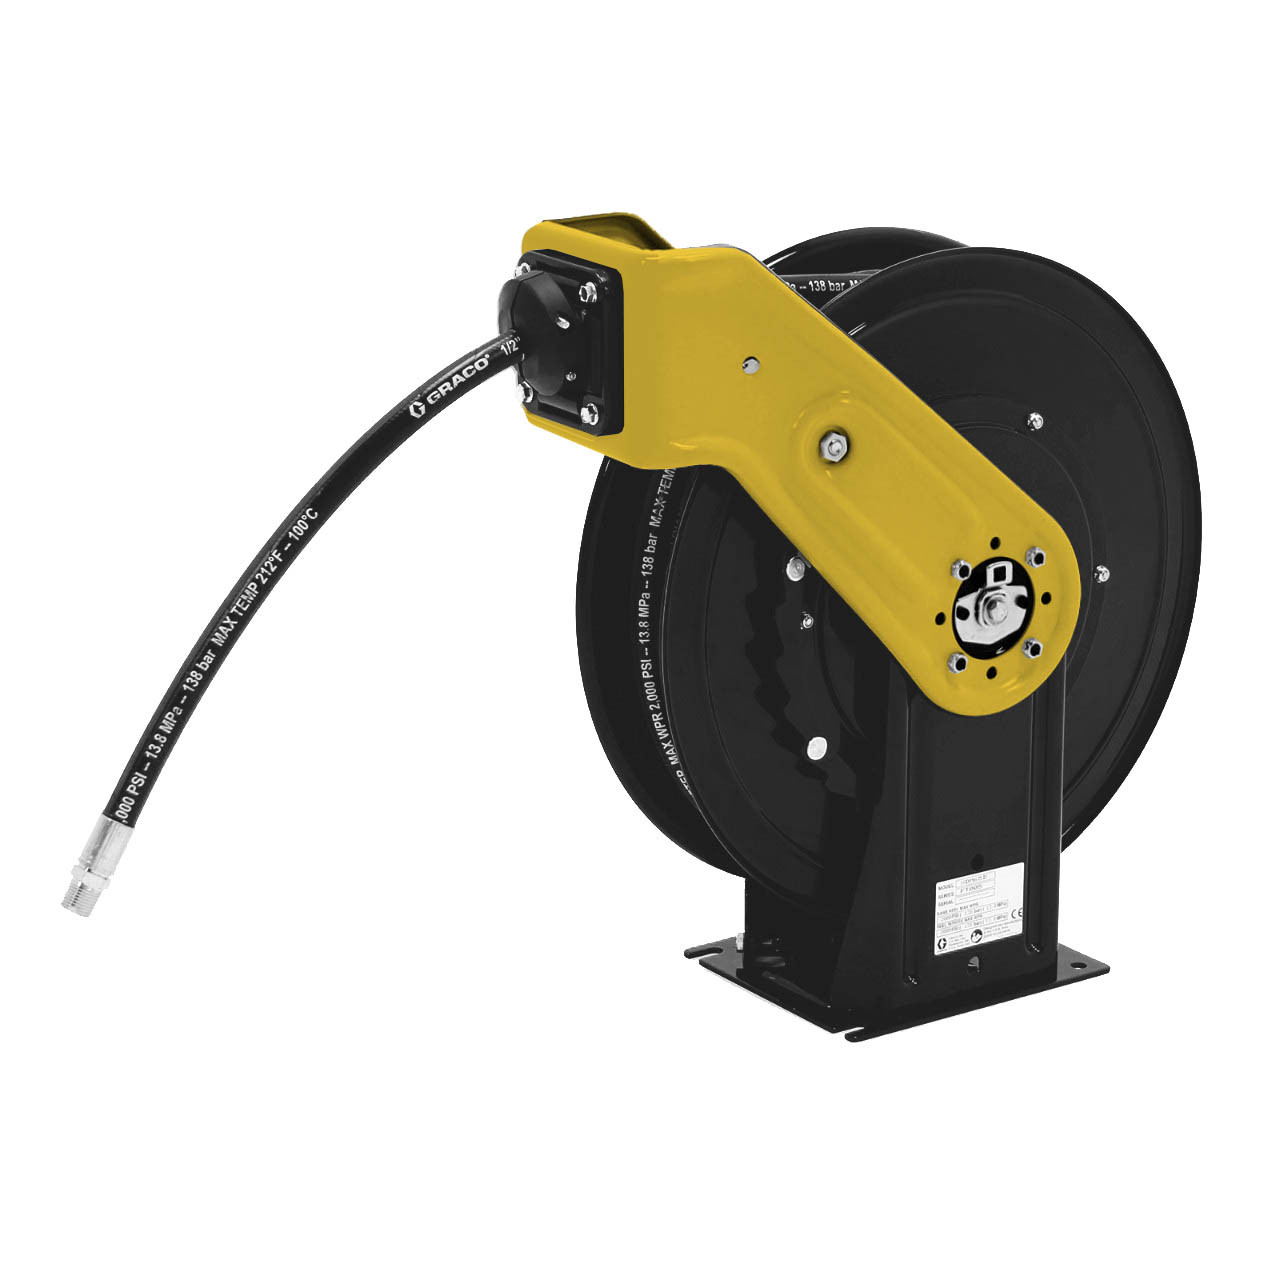 Graco SDM6DF - SDX20, Bare Oil Hose Reel 1/2 x 50' Overhead Mount, Yellow by FastoolNow